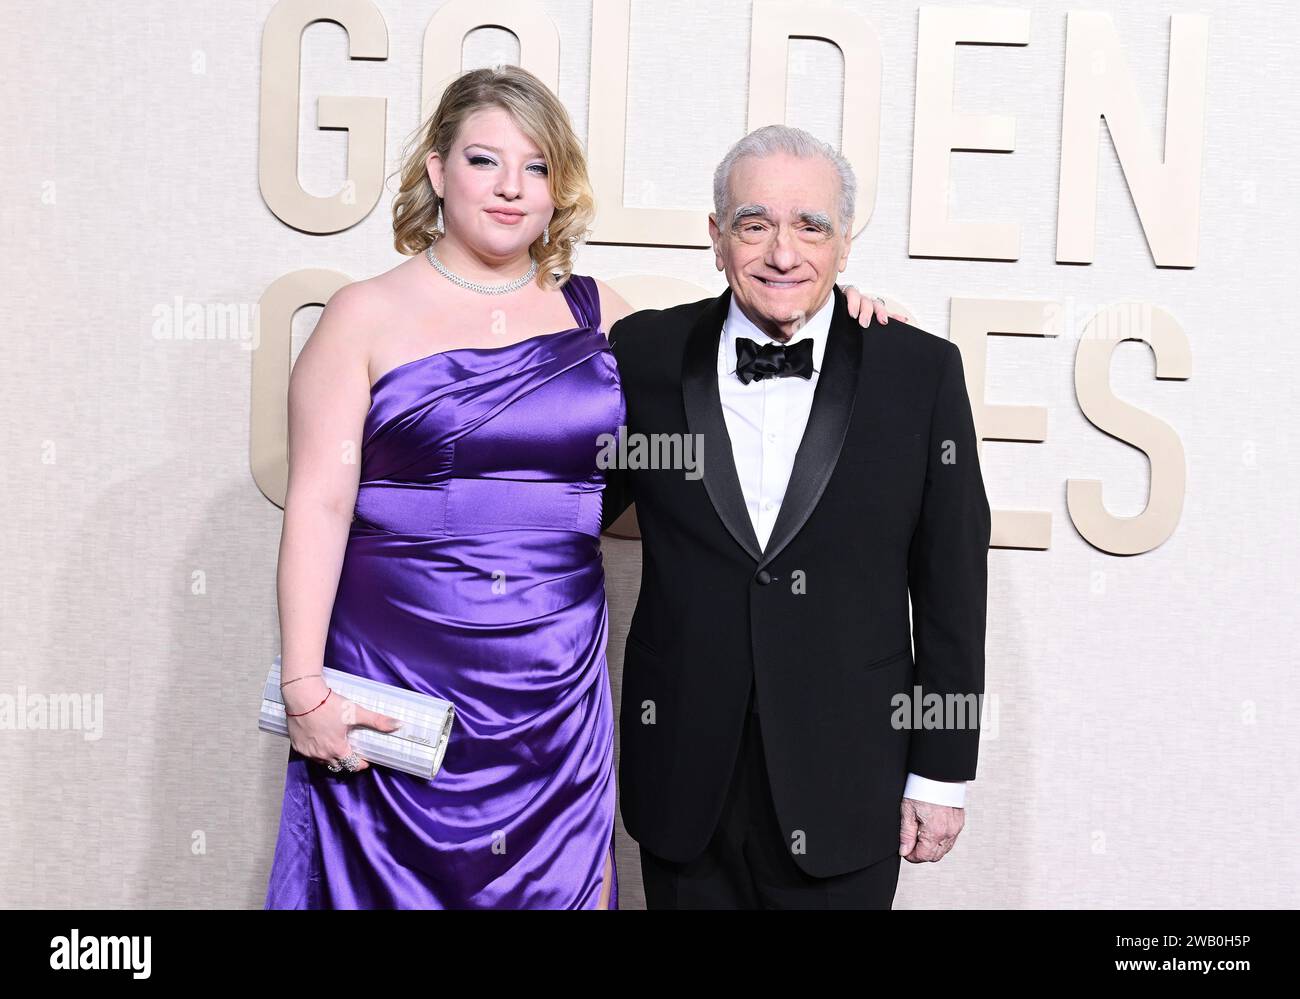 Francesca Scorsese and Martin Scorsese at the 81st Golden Globe Awards held at the Beverly Hilton Hotel on January 7, 2024 in Beverly Hills, California. Stock Photo